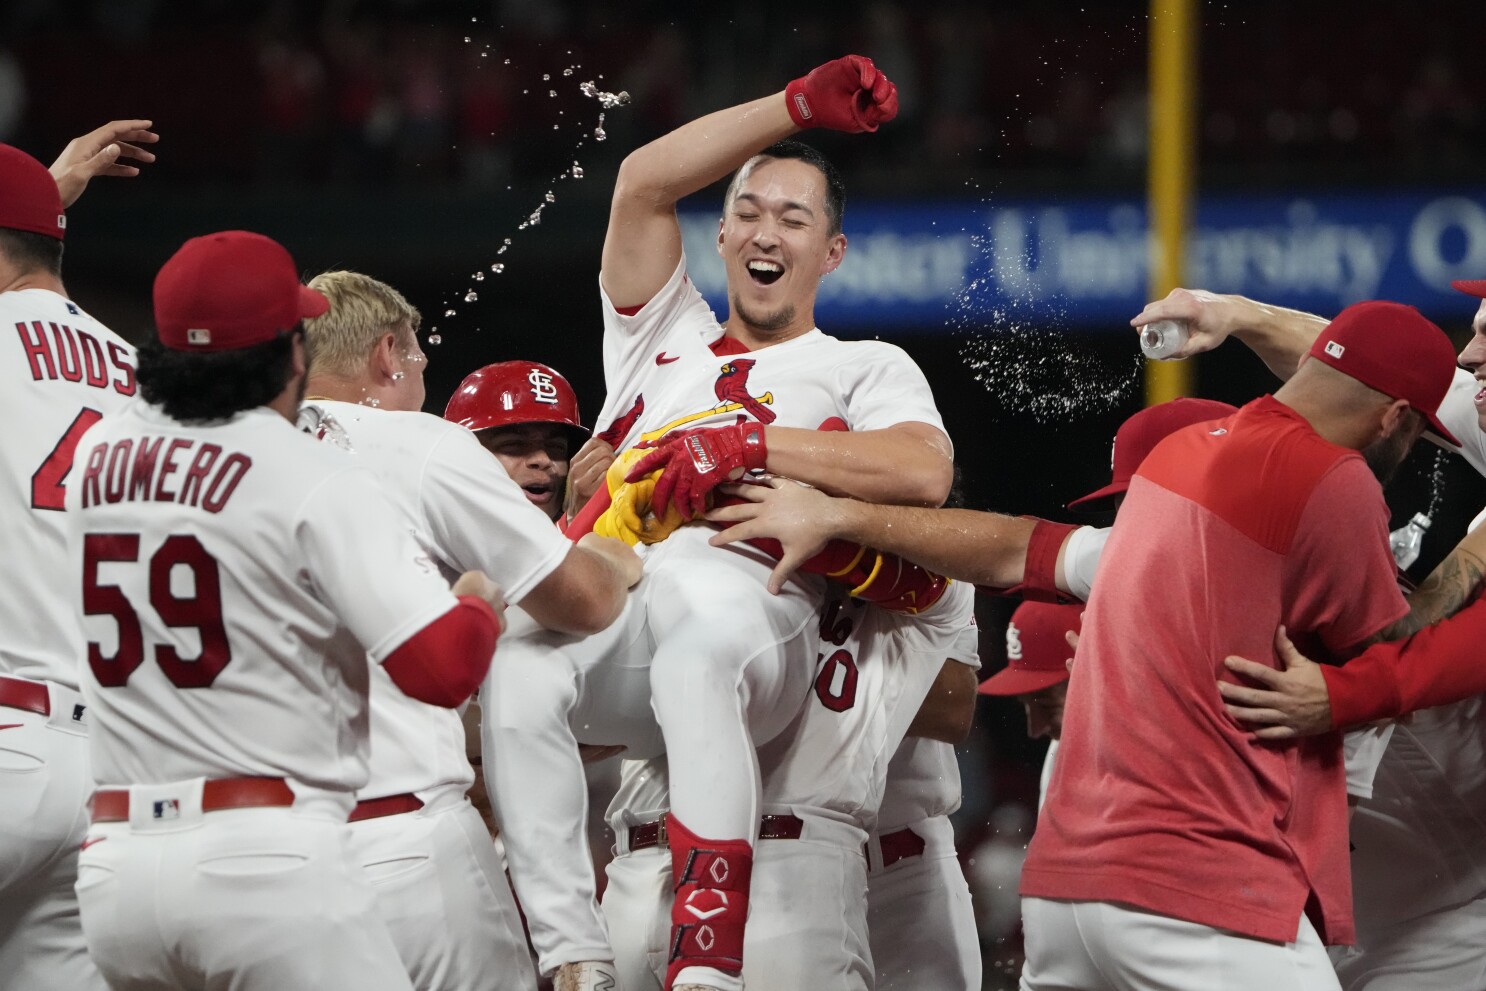 Contreras homers twice to help Cardinals knock off Padres 6-5 in 10 innings  - ABC News